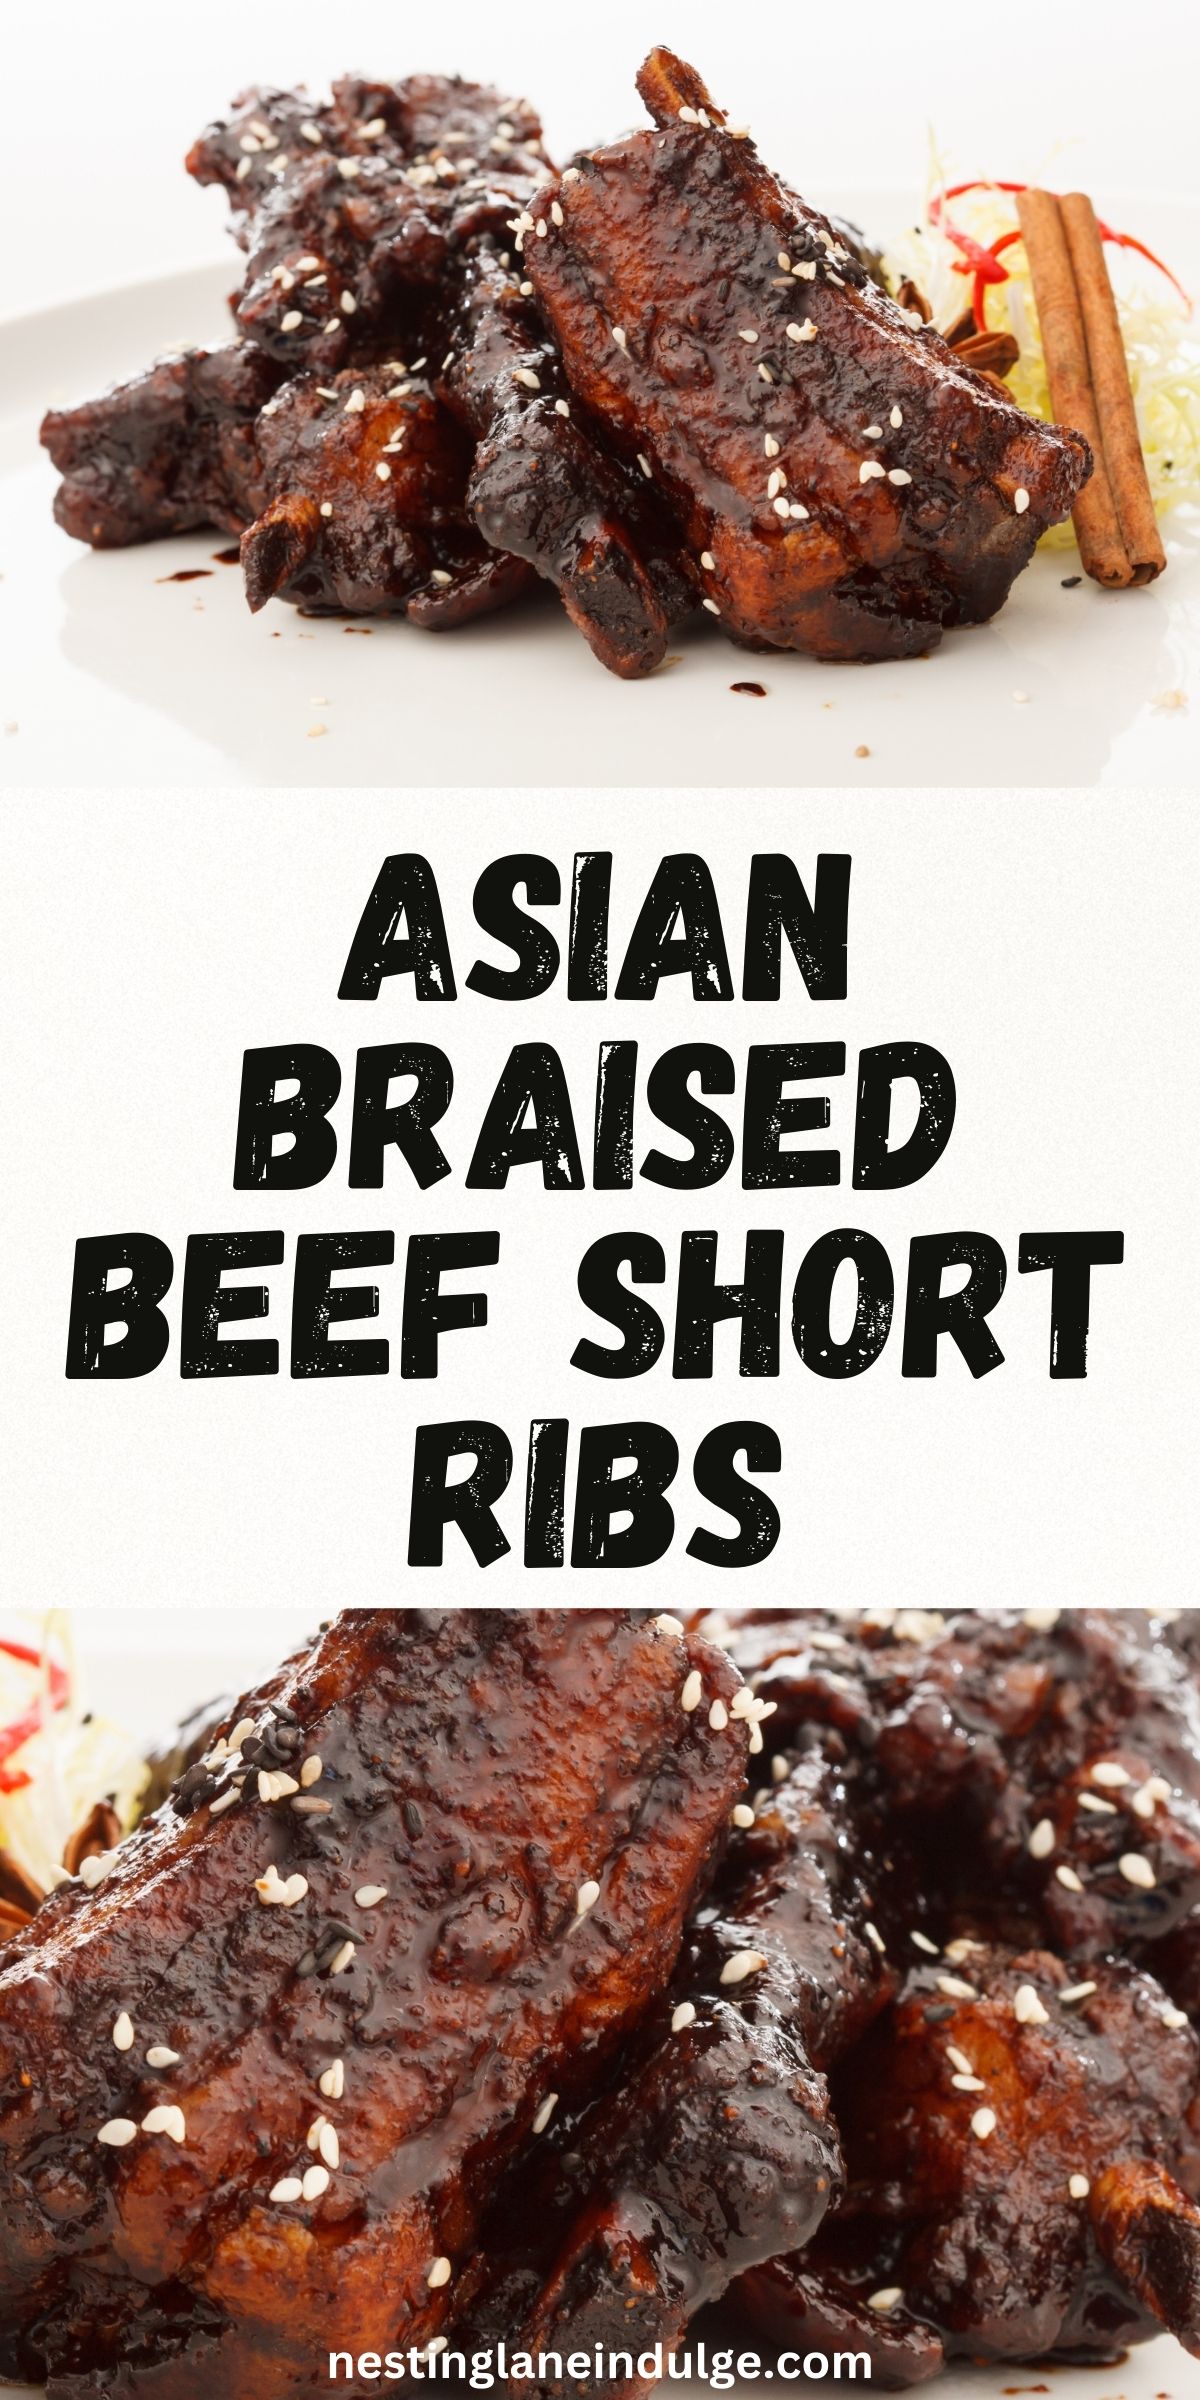 Asian Braised Beef Short Ribs Graphic.